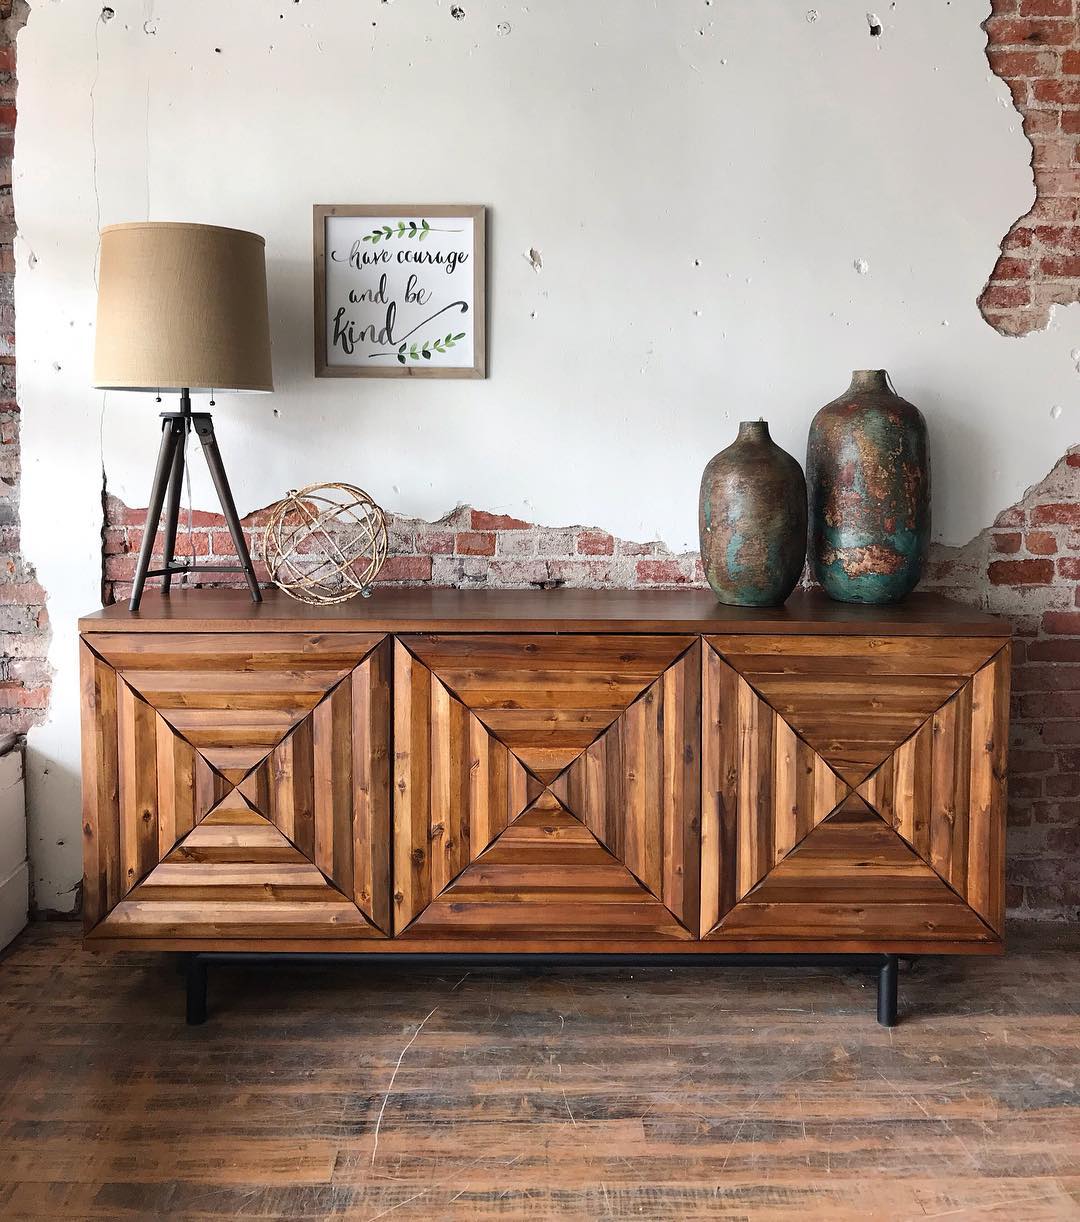 Wooden Credenza Placed in Front of a Brick Wall. Photo by Instagram user @abode_furnishings